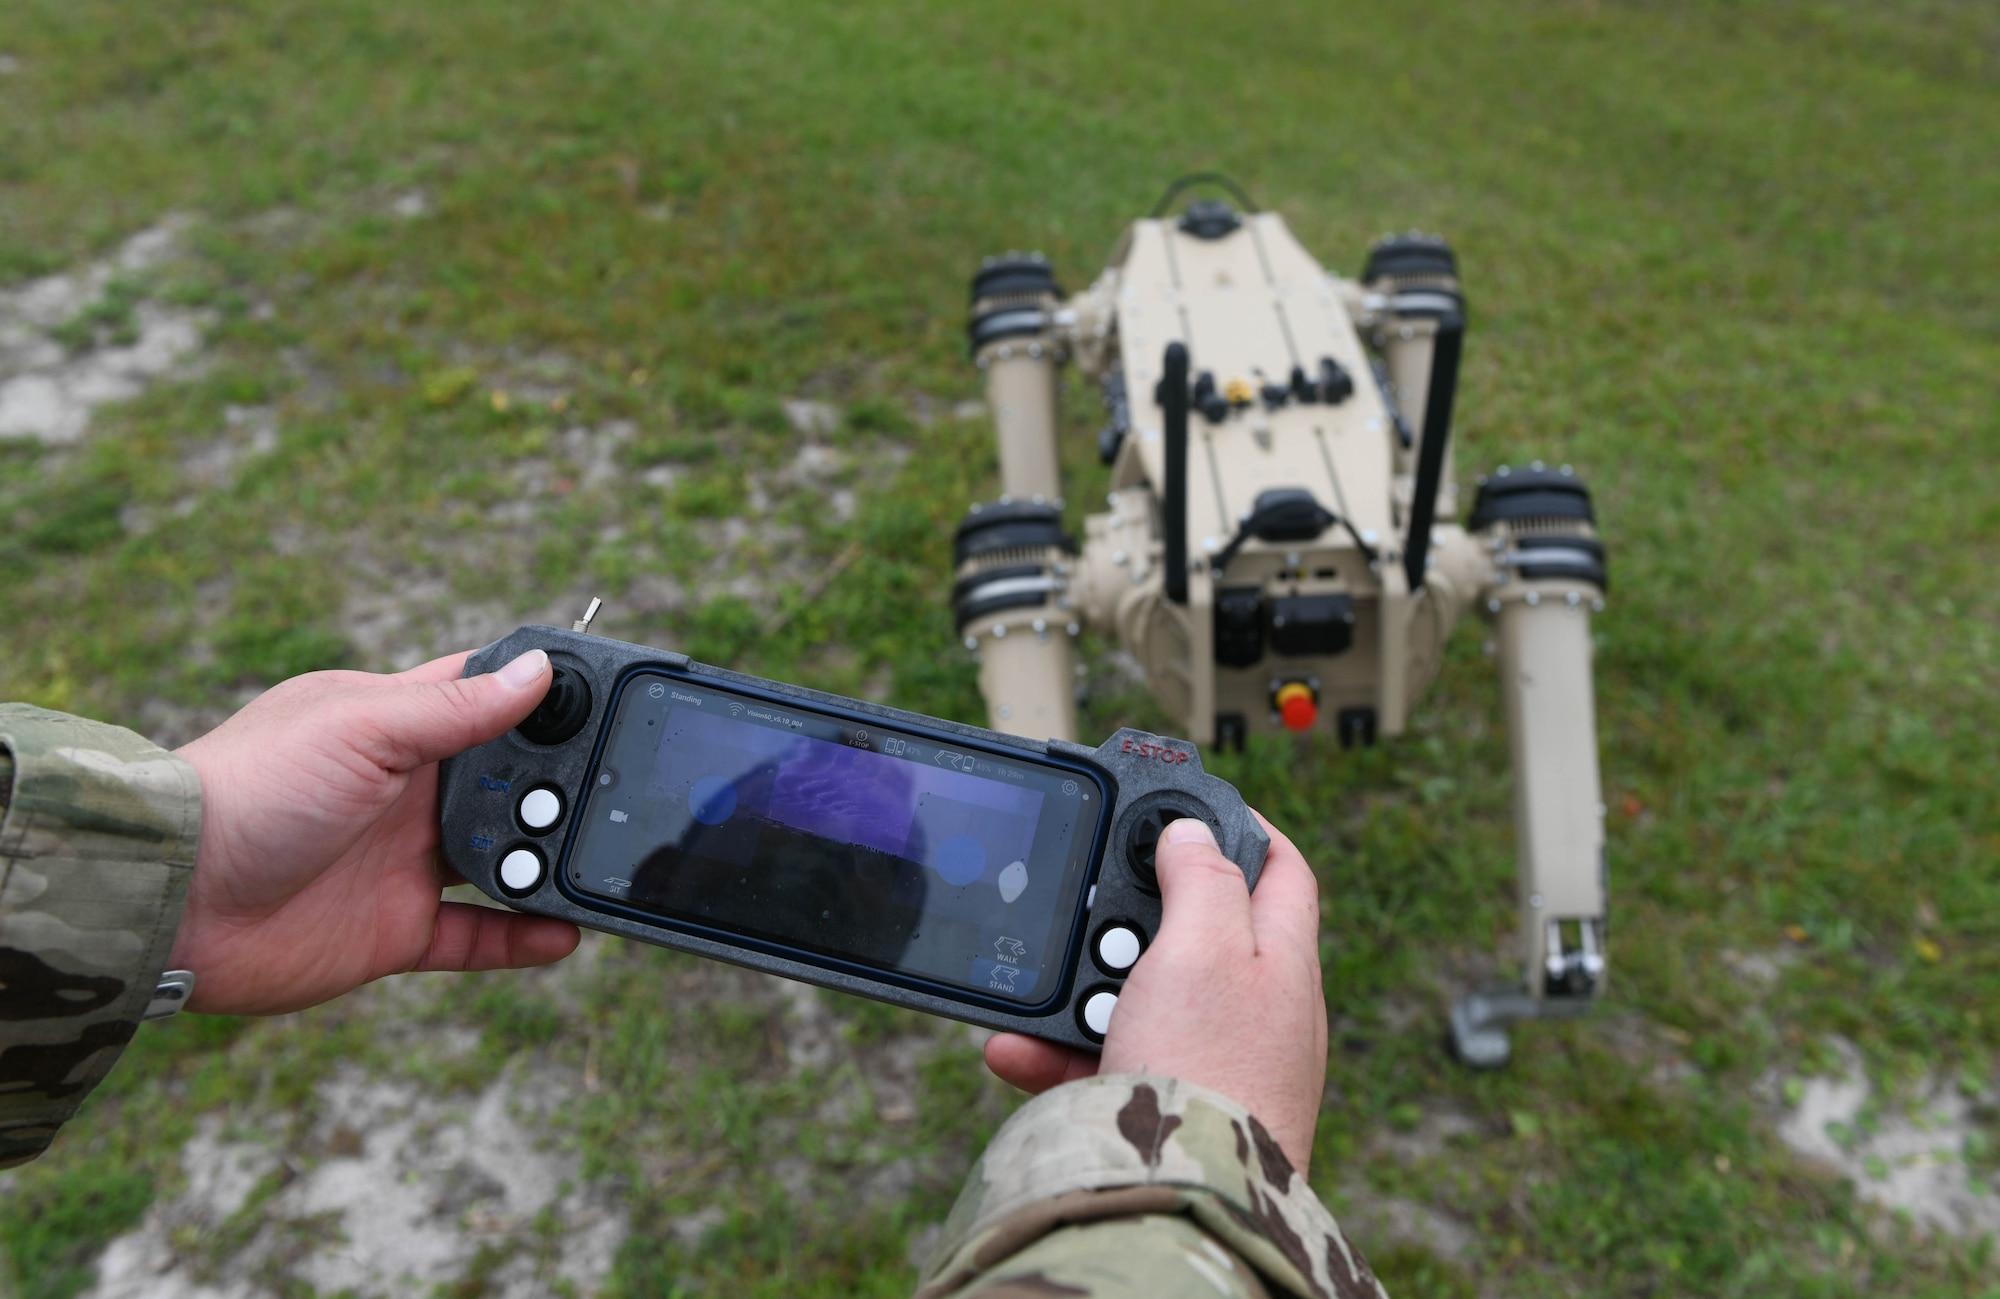 Master Sgt. Krystoffer Miller, 325th Security Forces Squadron operations support superintendent, operates a Quad-legged Unmanned Ground Vehicle at Tyndall Air Force Base, Fla., March 24, 2021. The purpose of the Q-UGV is to add an extra level of protection to base. (U.S. Air Force photo by Airman 1st Class Anabel Del Valle)